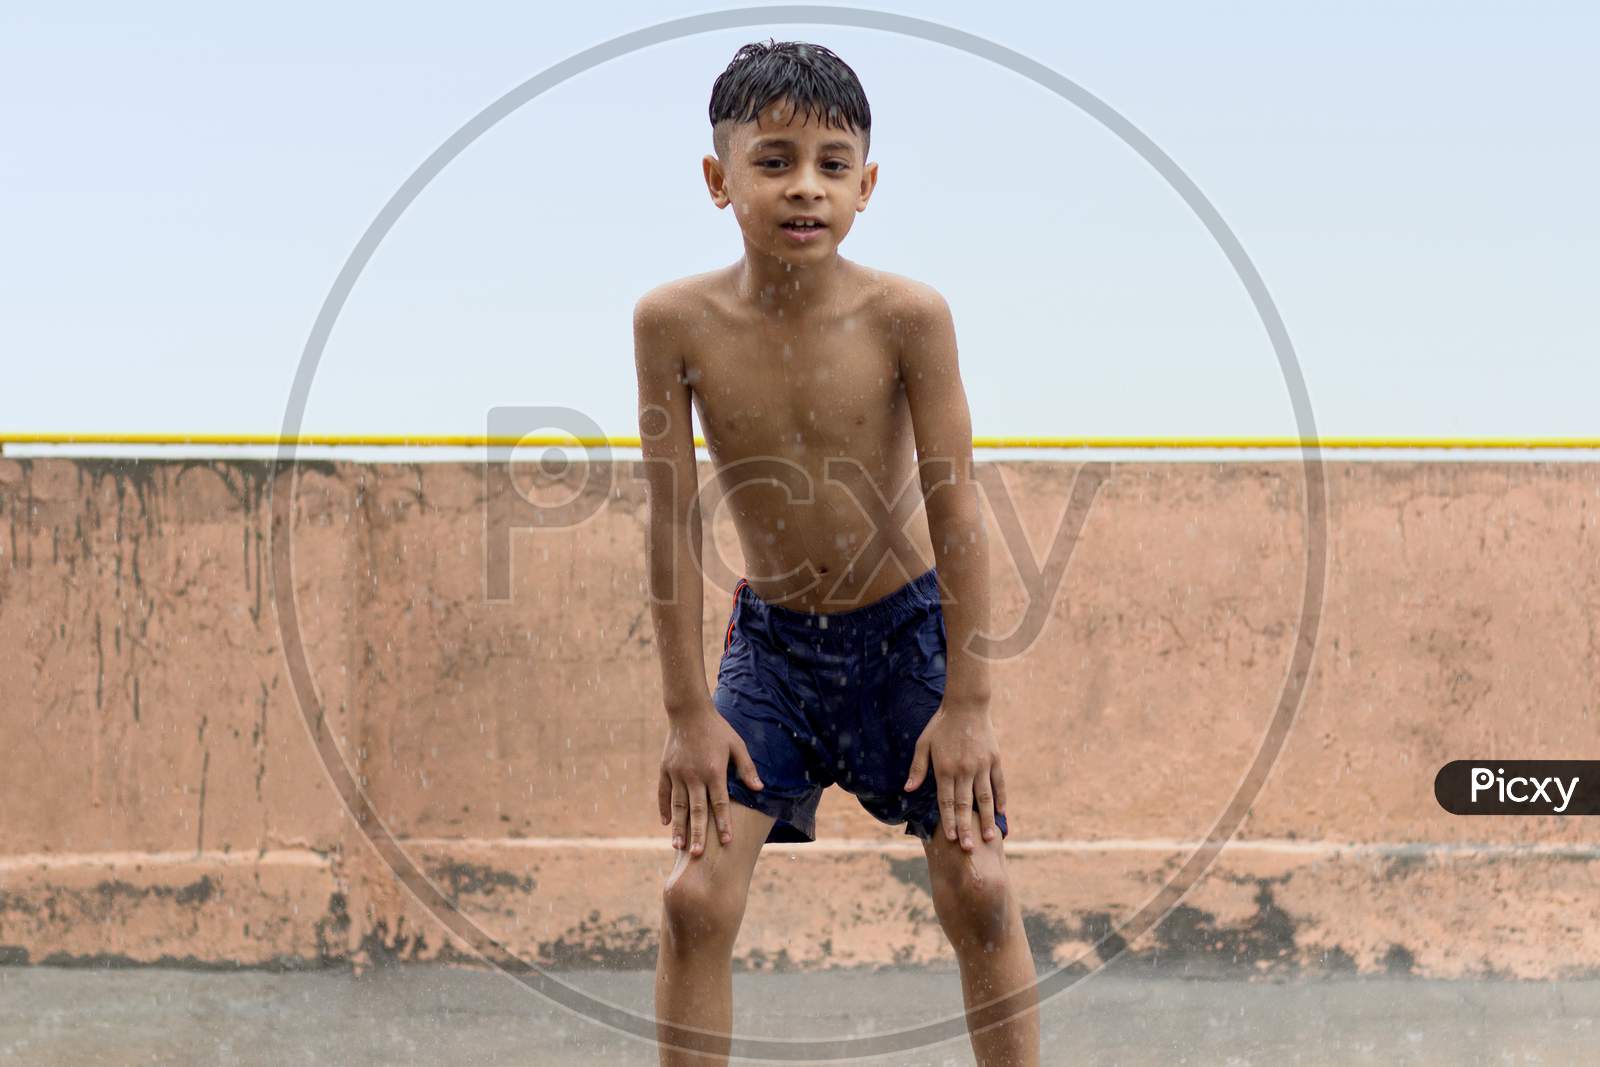 One Wet Kid Playing And Having Fun In Rain At His Terrace, Outdoors During Monsoon Season.